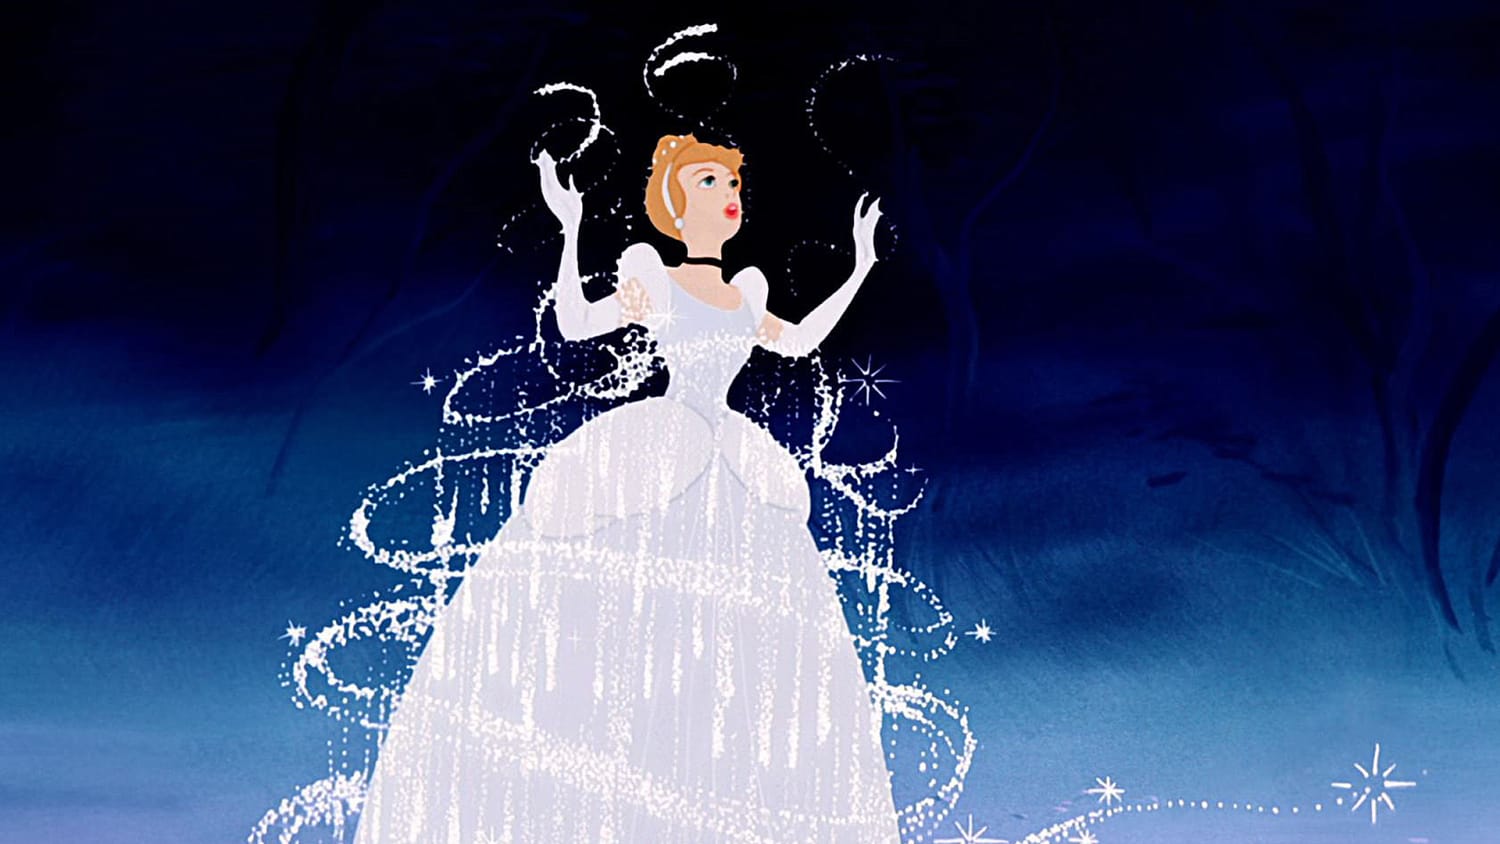 Is Cinderella's dress really blue or white? The internet can't decide